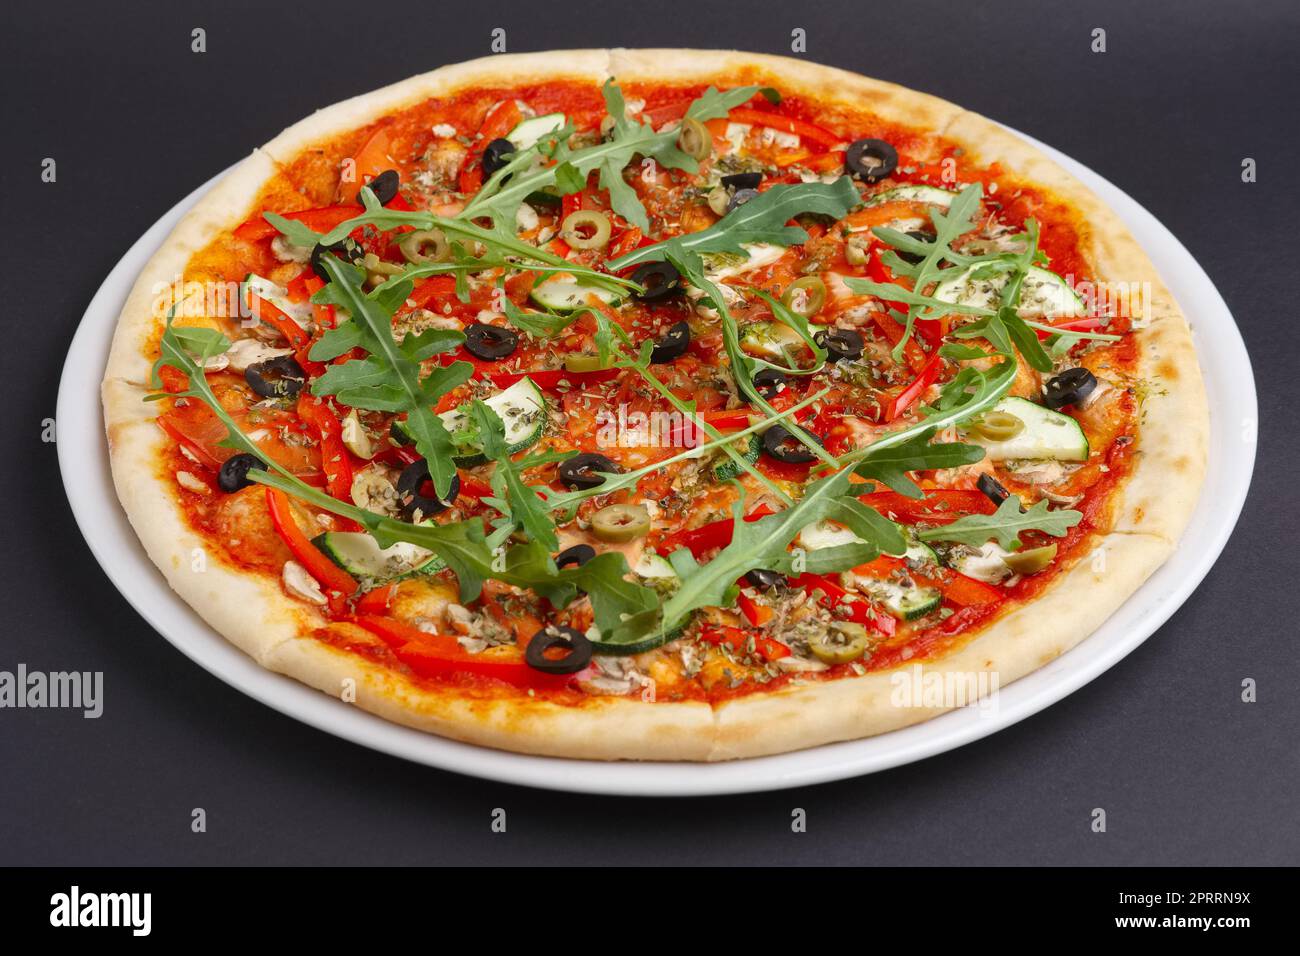 Lean pizza Margherita with cheese, arugula, tomato sauce on a white plate. Stock Photo